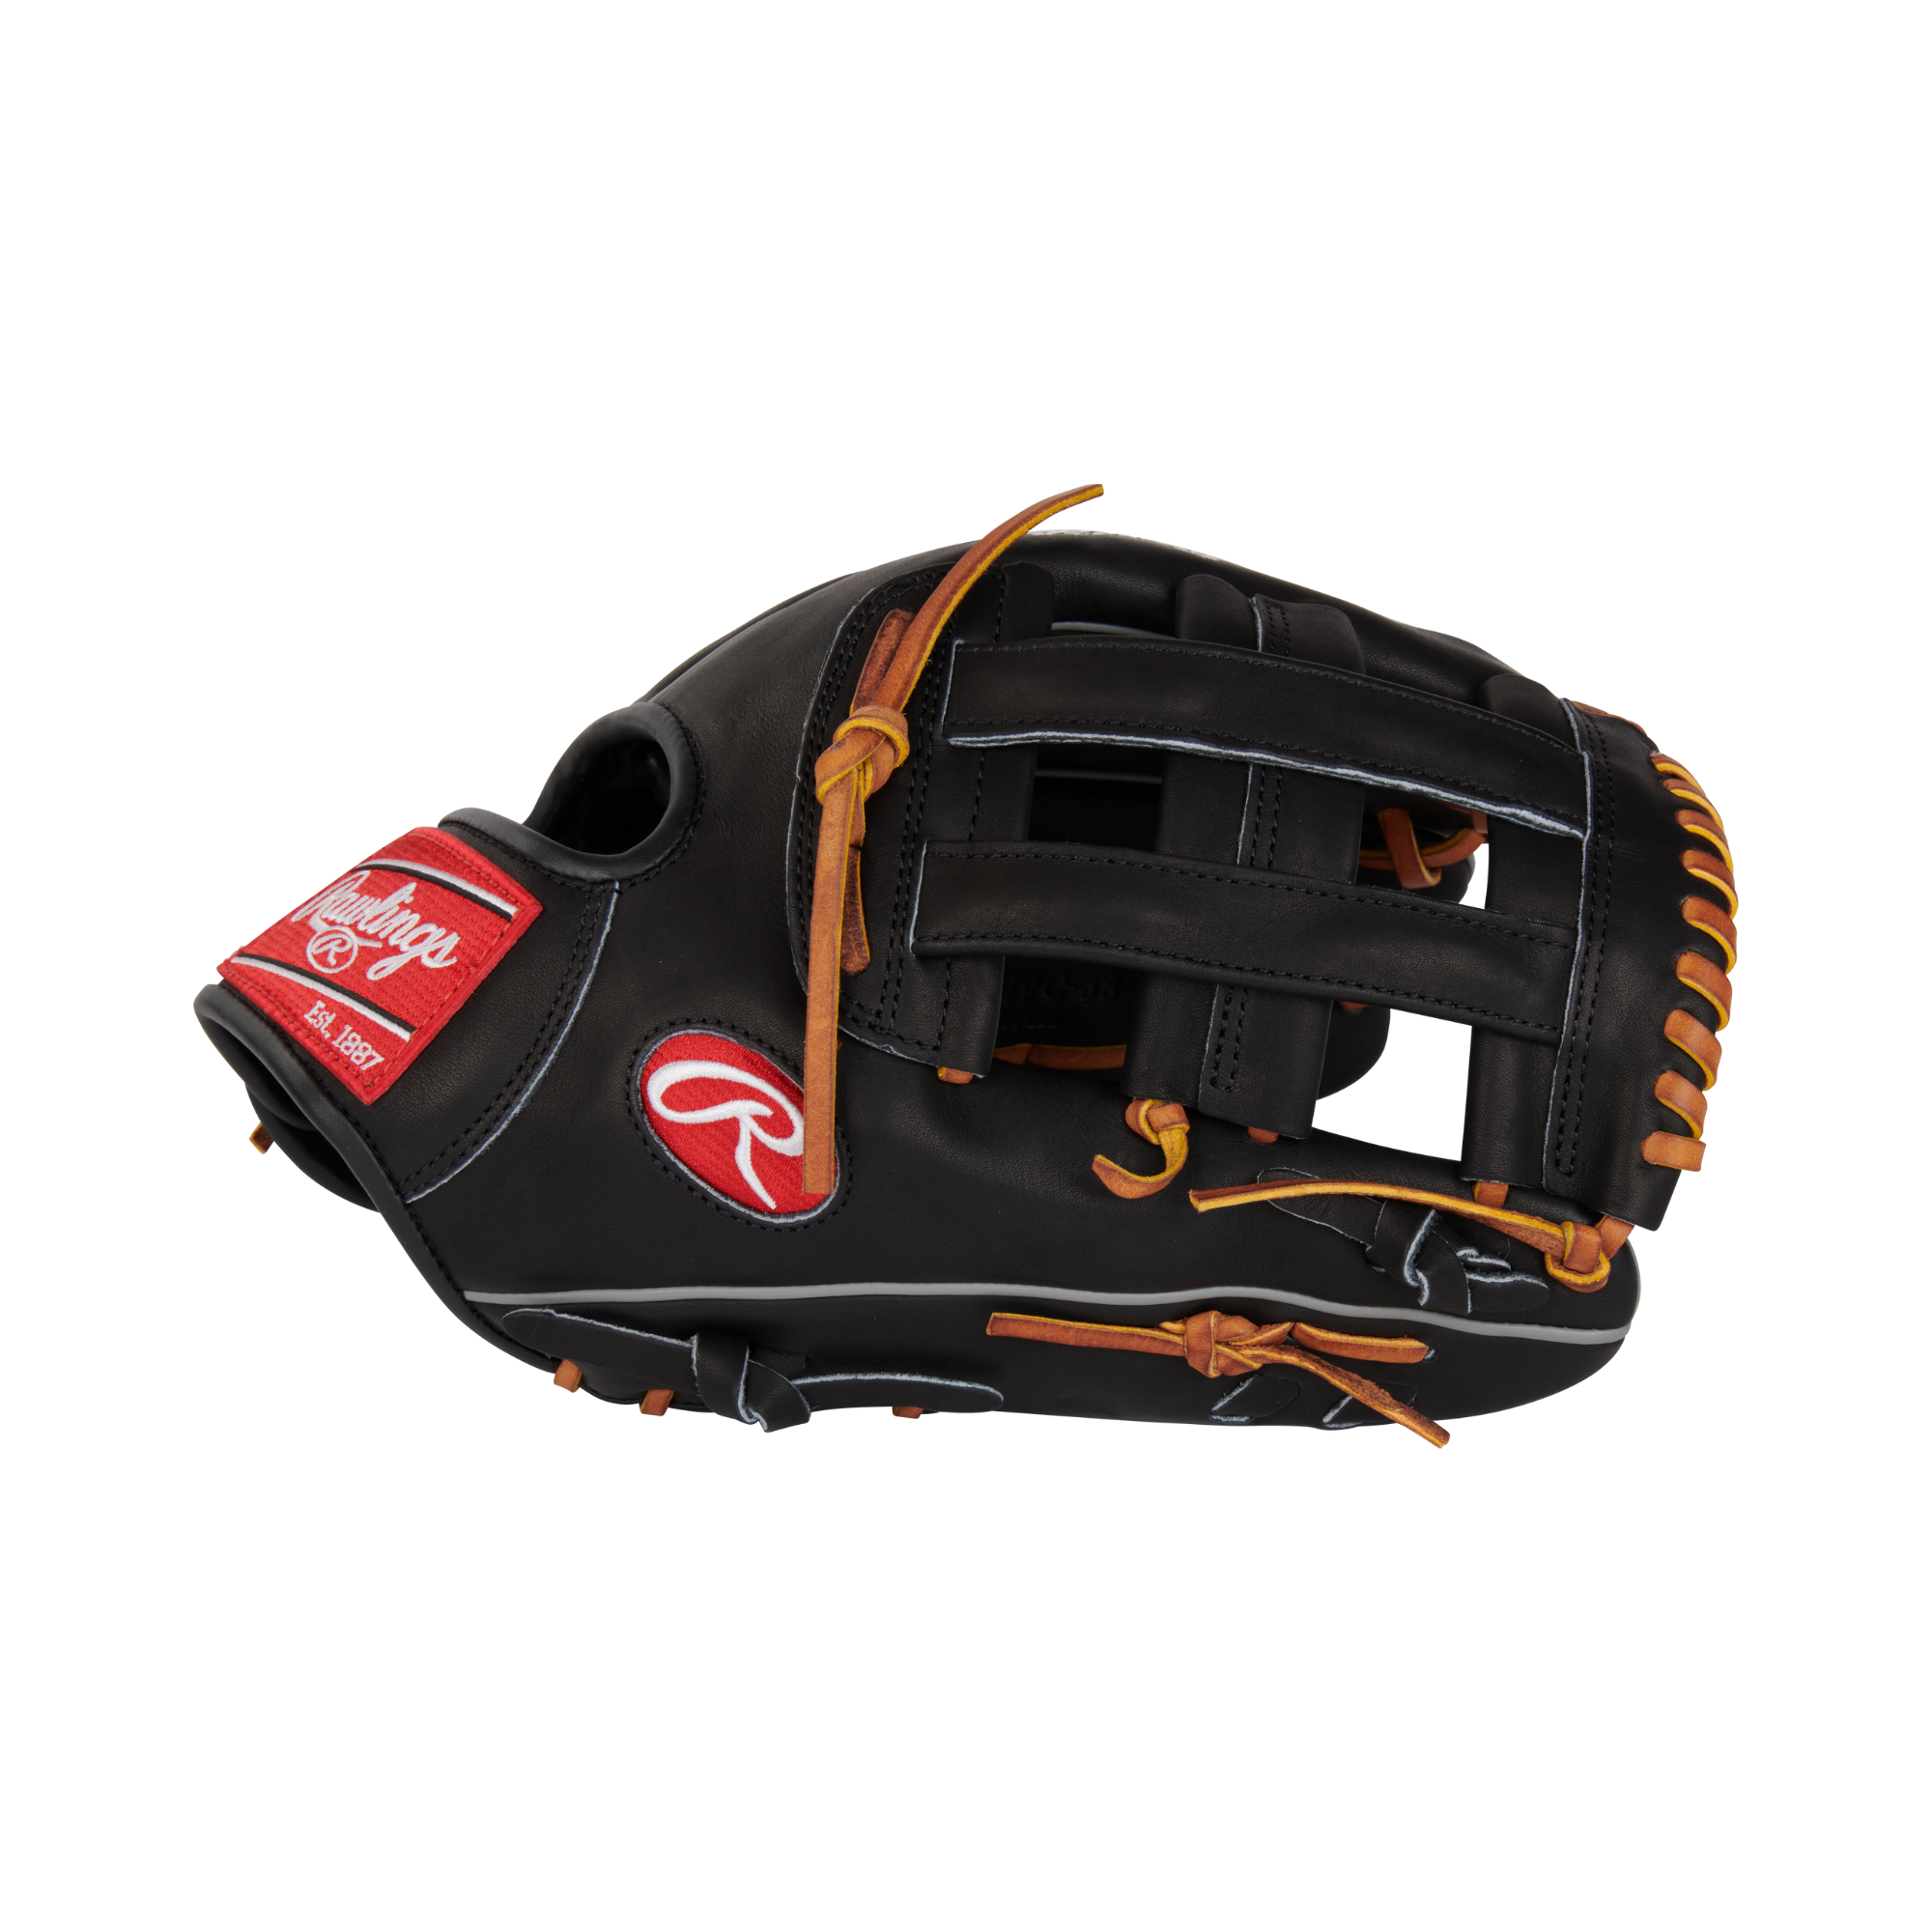 Rawlings Heart Of The Hide Traditional Series Baseball Glove 12.75"LHT